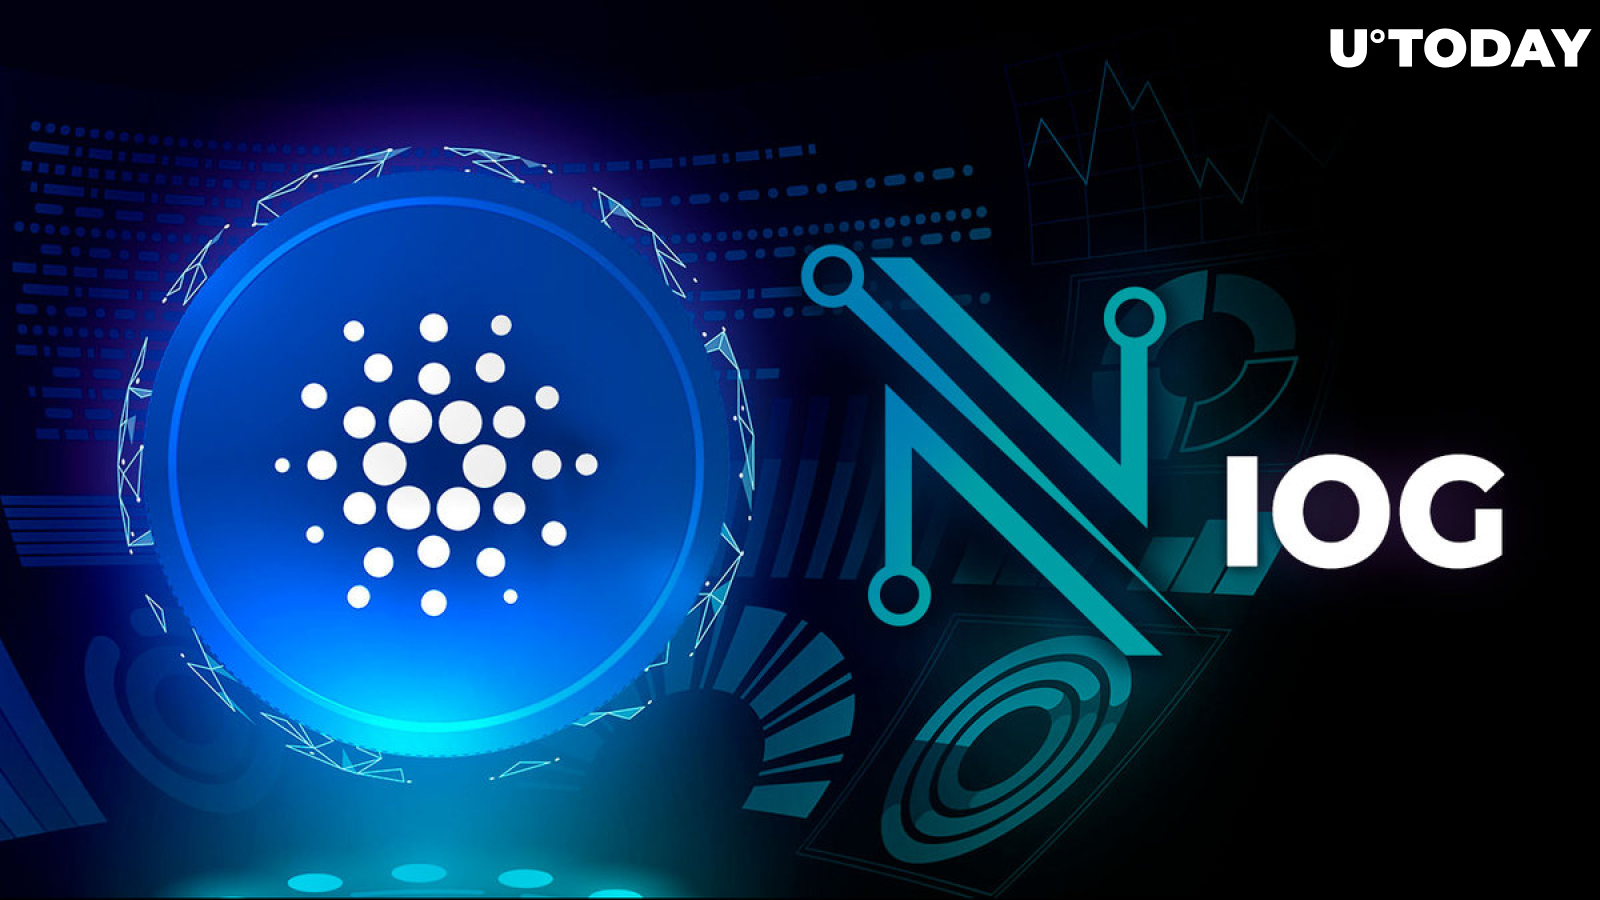 Cardano (ADA) Wallet Nami Becomes IOG Product, Charles Hoskinson Excited